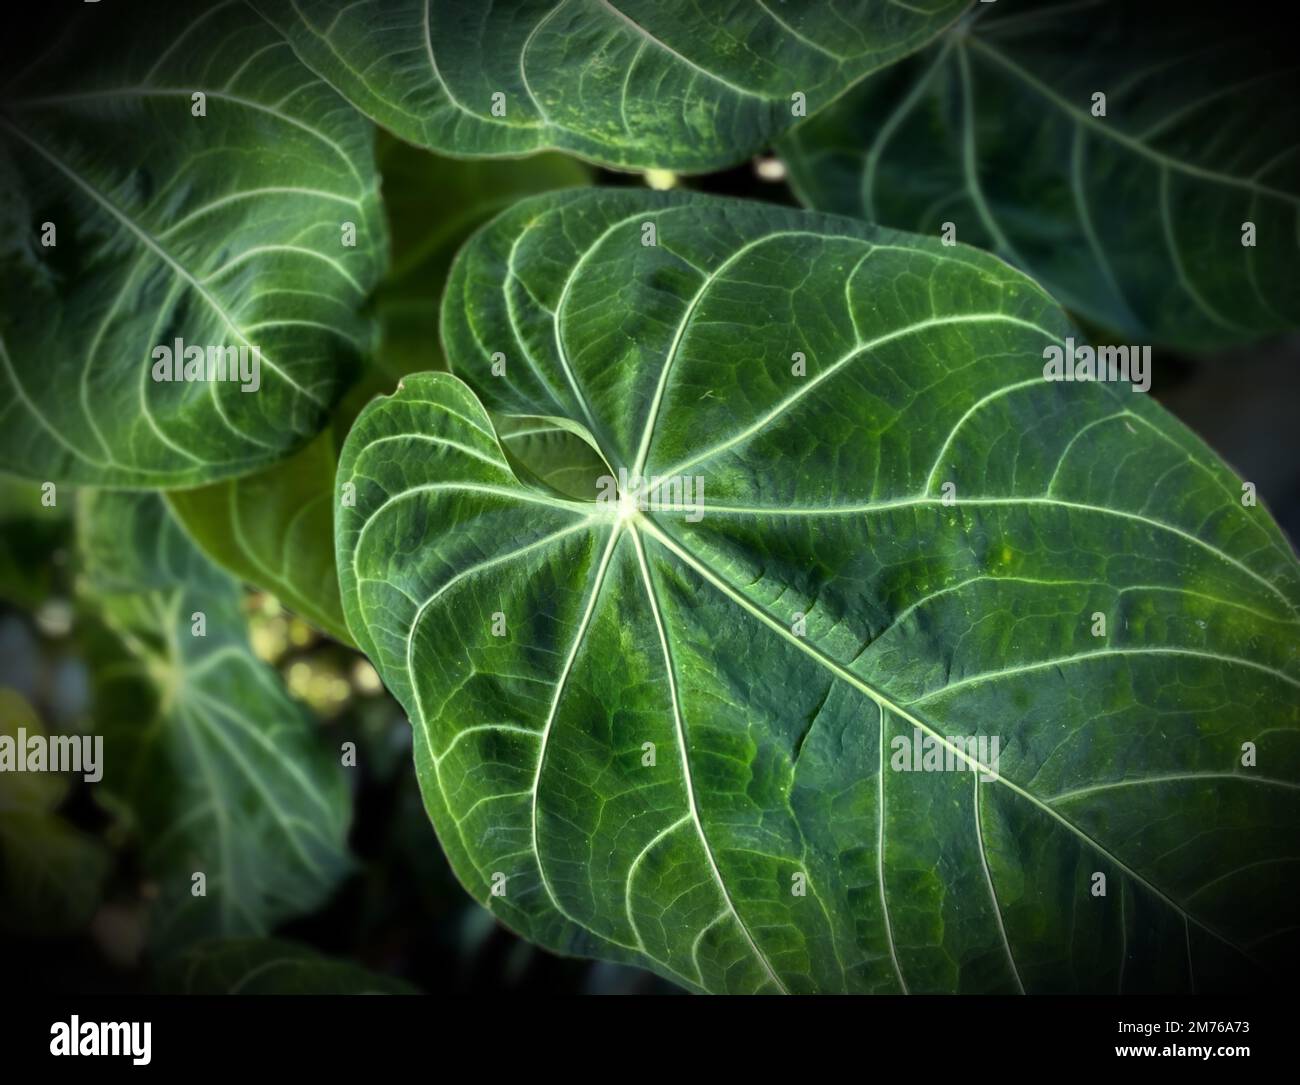 Fresh and large leaves of Anthurium crystallinum are perfect for the background. Anthurium crystallinum is a type of plant from the taro tribe, including the Araceae family. Stock Photo